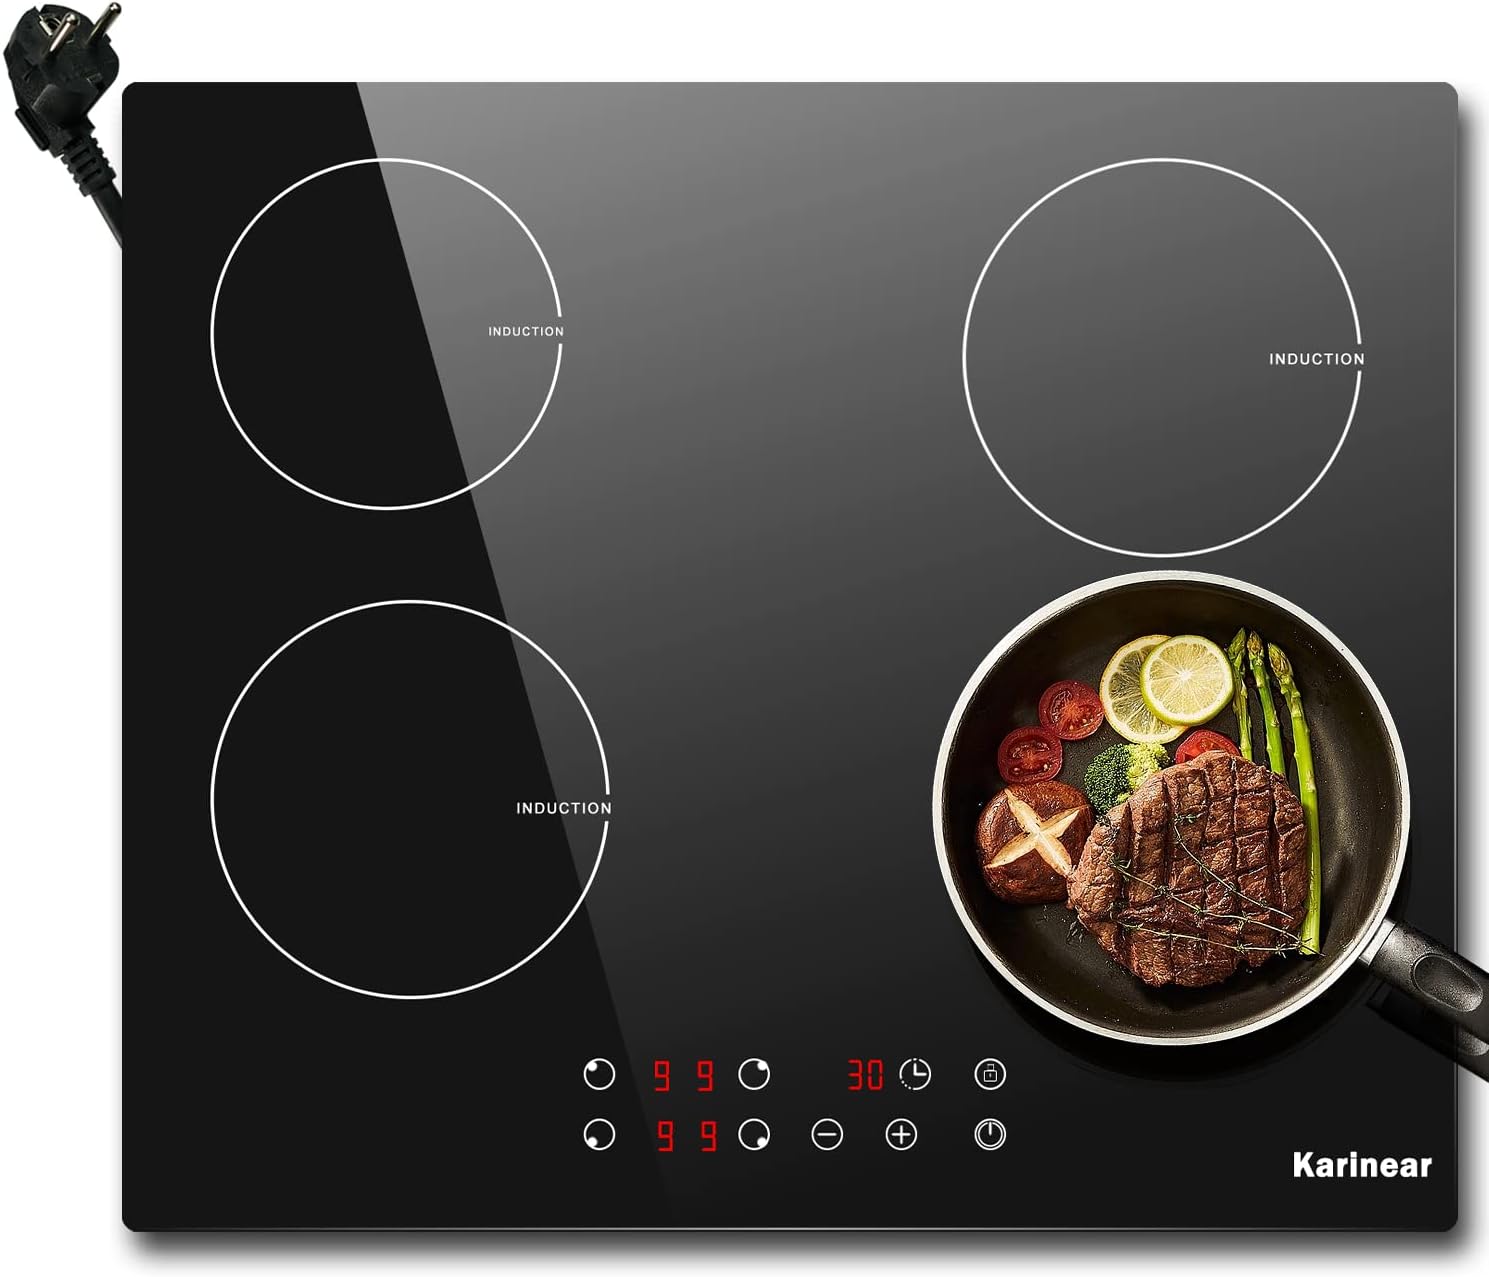 Karrinear 4 Burner Induction Cooktop 24 inch with Booster,220-240v 6500W Built-in Glass Ceramic Electric Induction Burner,